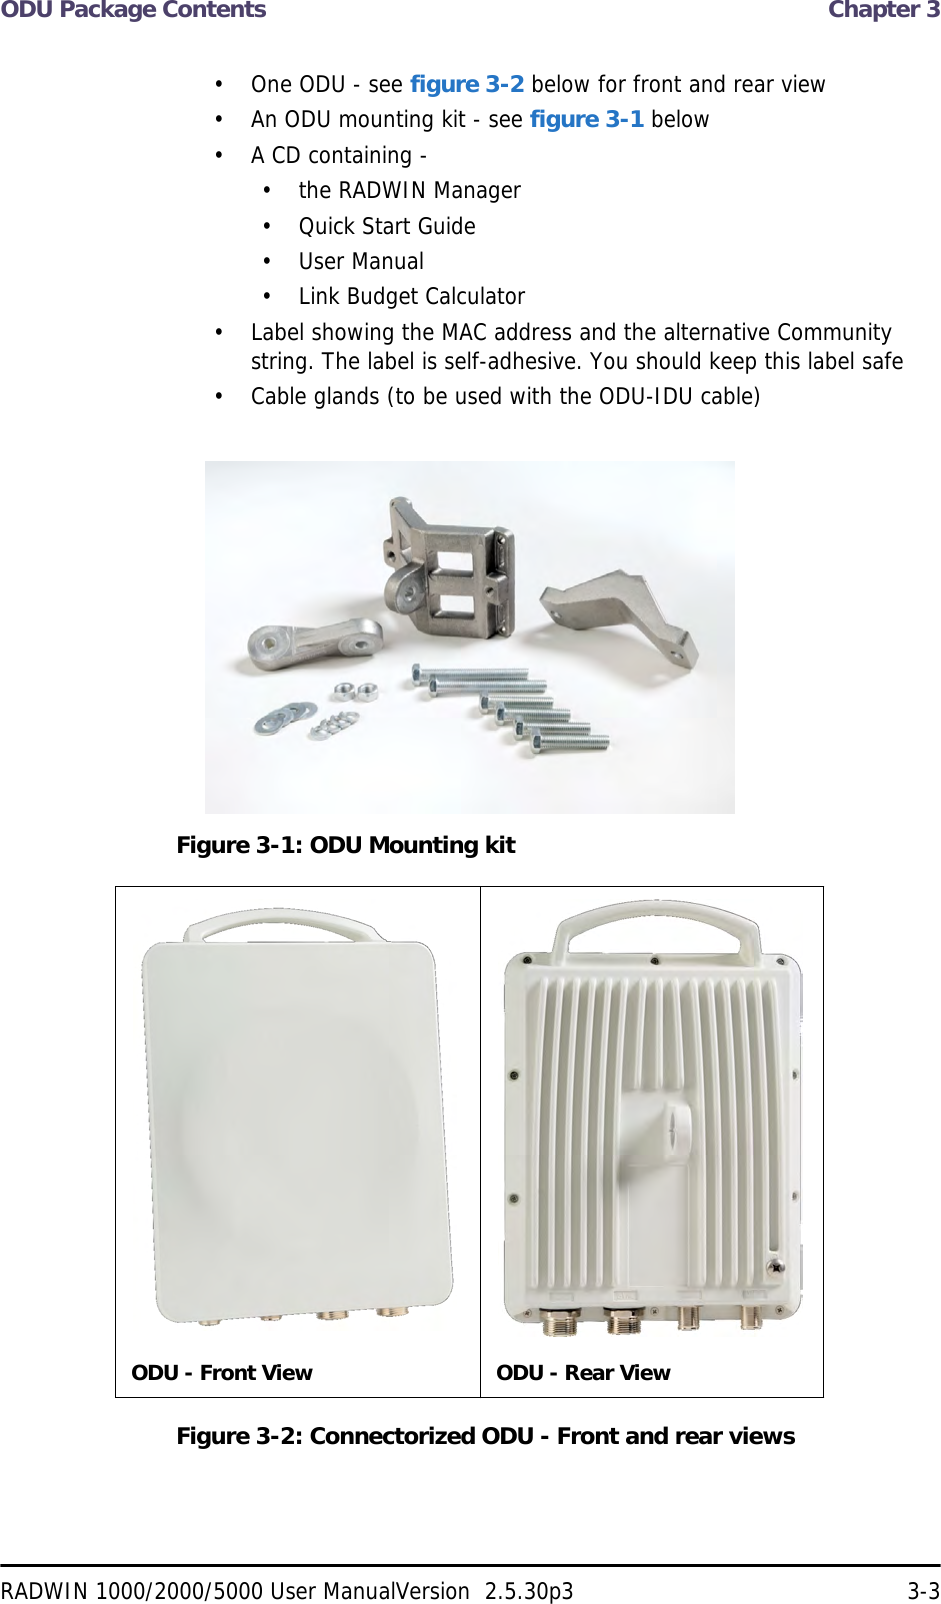 ODU Package Contents  Chapter 3RADWIN 1000/2000/5000 User ManualVersion  2.5.30p3 3-3• One ODU - see figure 3-2 below for front and rear view• An ODU mounting kit - see figure 3-1 below• A CD containing -• the RADWIN Manager• Quick Start Guide• User Manual• Link Budget Calculator• Label showing the MAC address and the alternative Community string. The label is self-adhesive. You should keep this label safe• Cable glands (to be used with the ODU-IDU cable)Figure 3-1: ODU Mounting kitFigure 3-2: Connectorized ODU - Front and rear viewsODU - Front View ODU - Rear View